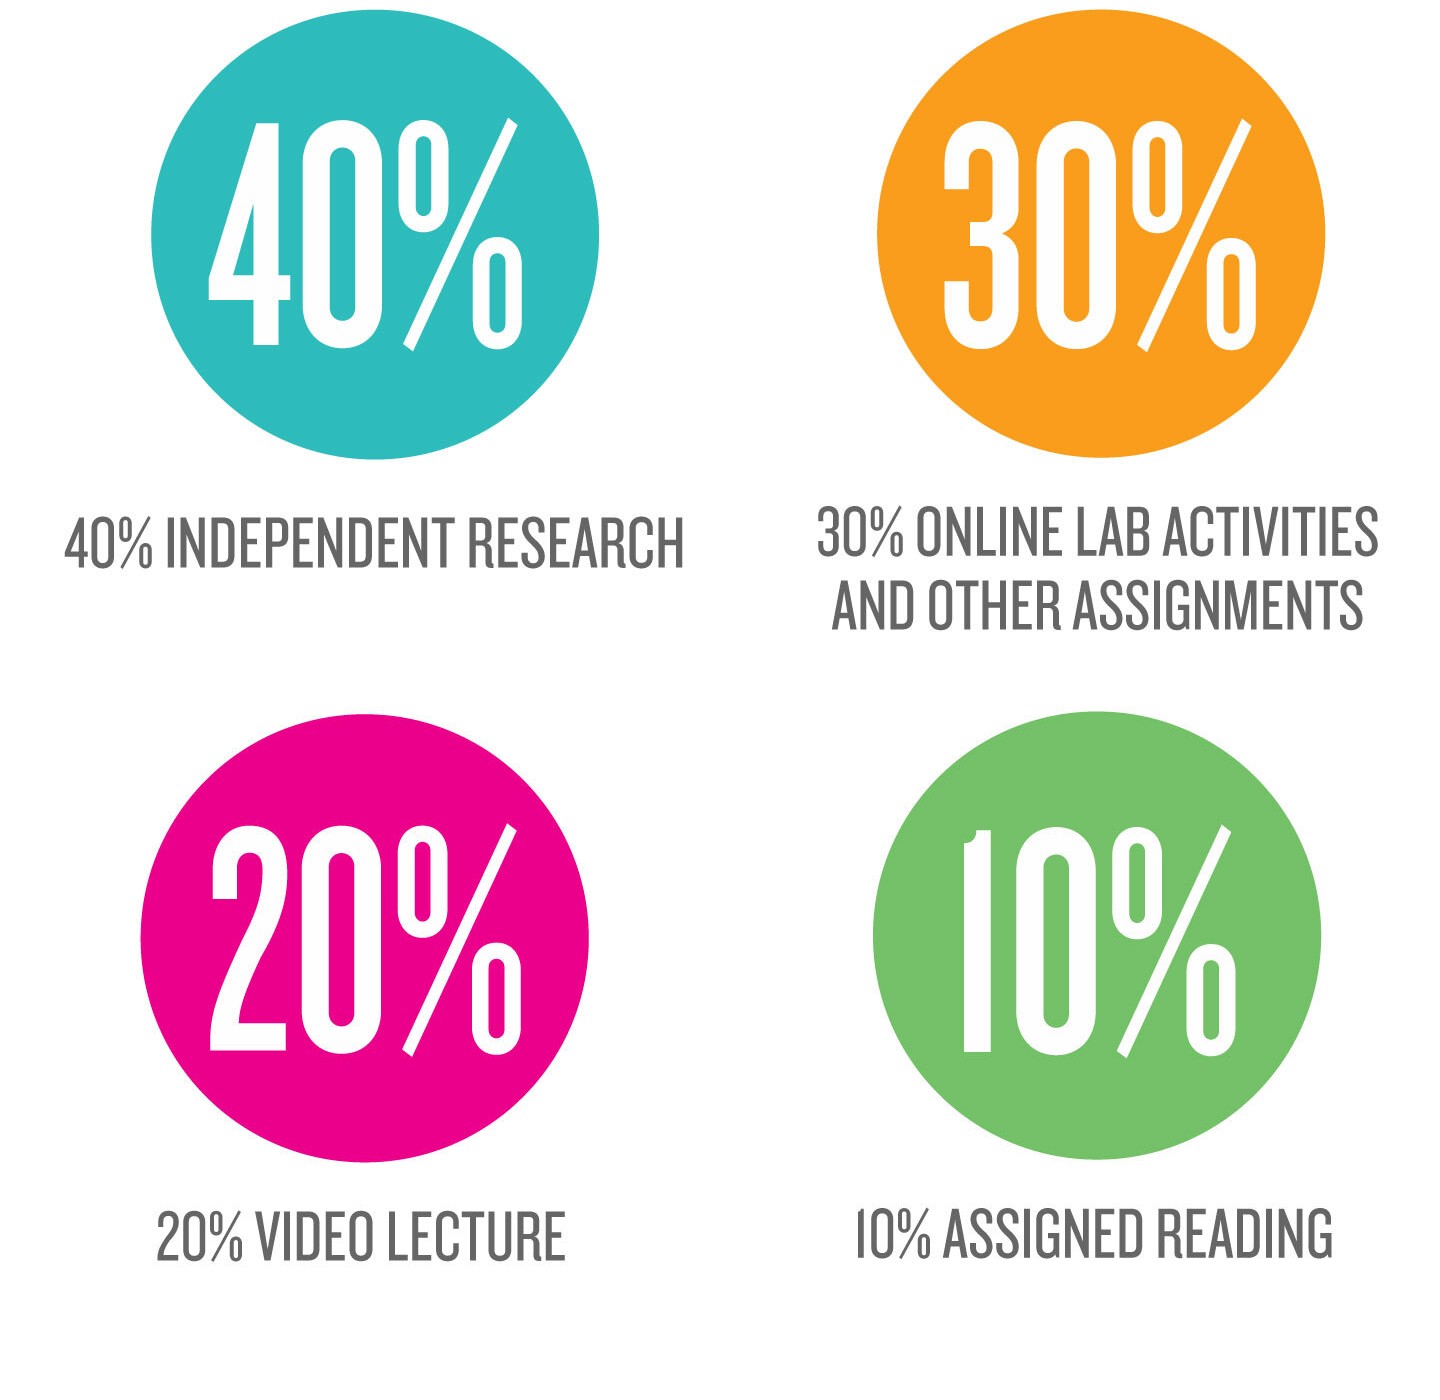 A breakdown of Emily Dangremond's class: 40% independent research, 30% online activities, 20% video lecture, 10% assigned reading